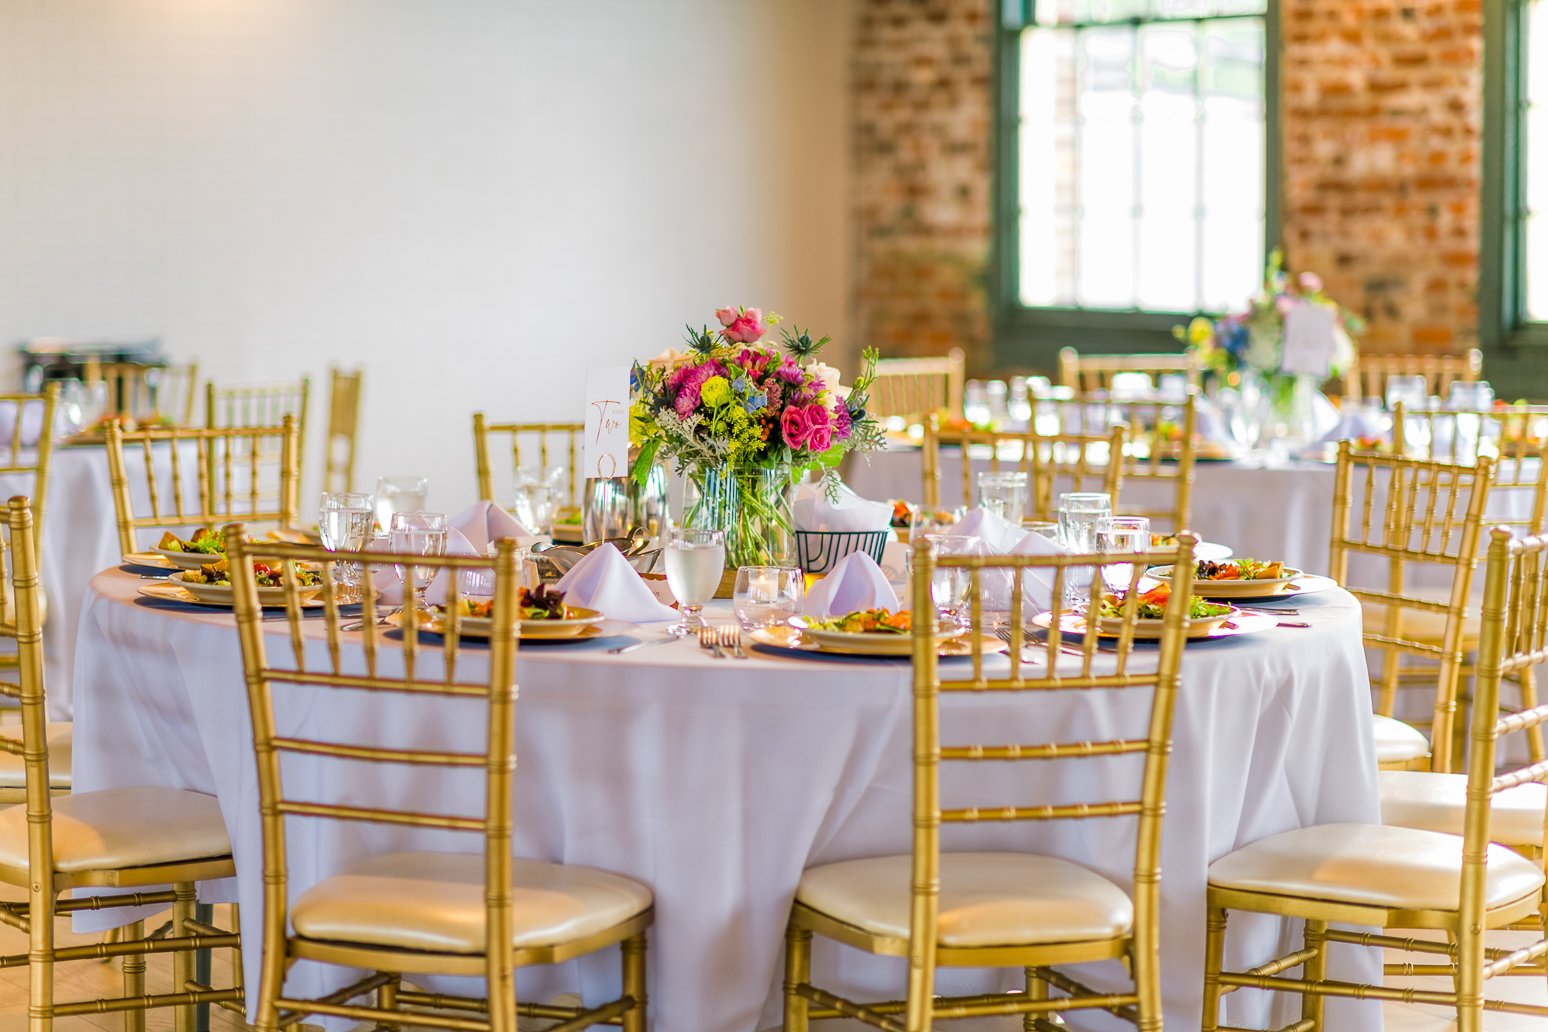 WoolenMill_TheSIlkMill_FredericksburgWeddingVenue_DowntownFredericksburg_VirginiaWeddingVenue_Event_BridalShow2023_youseephotography_pic27.jpg